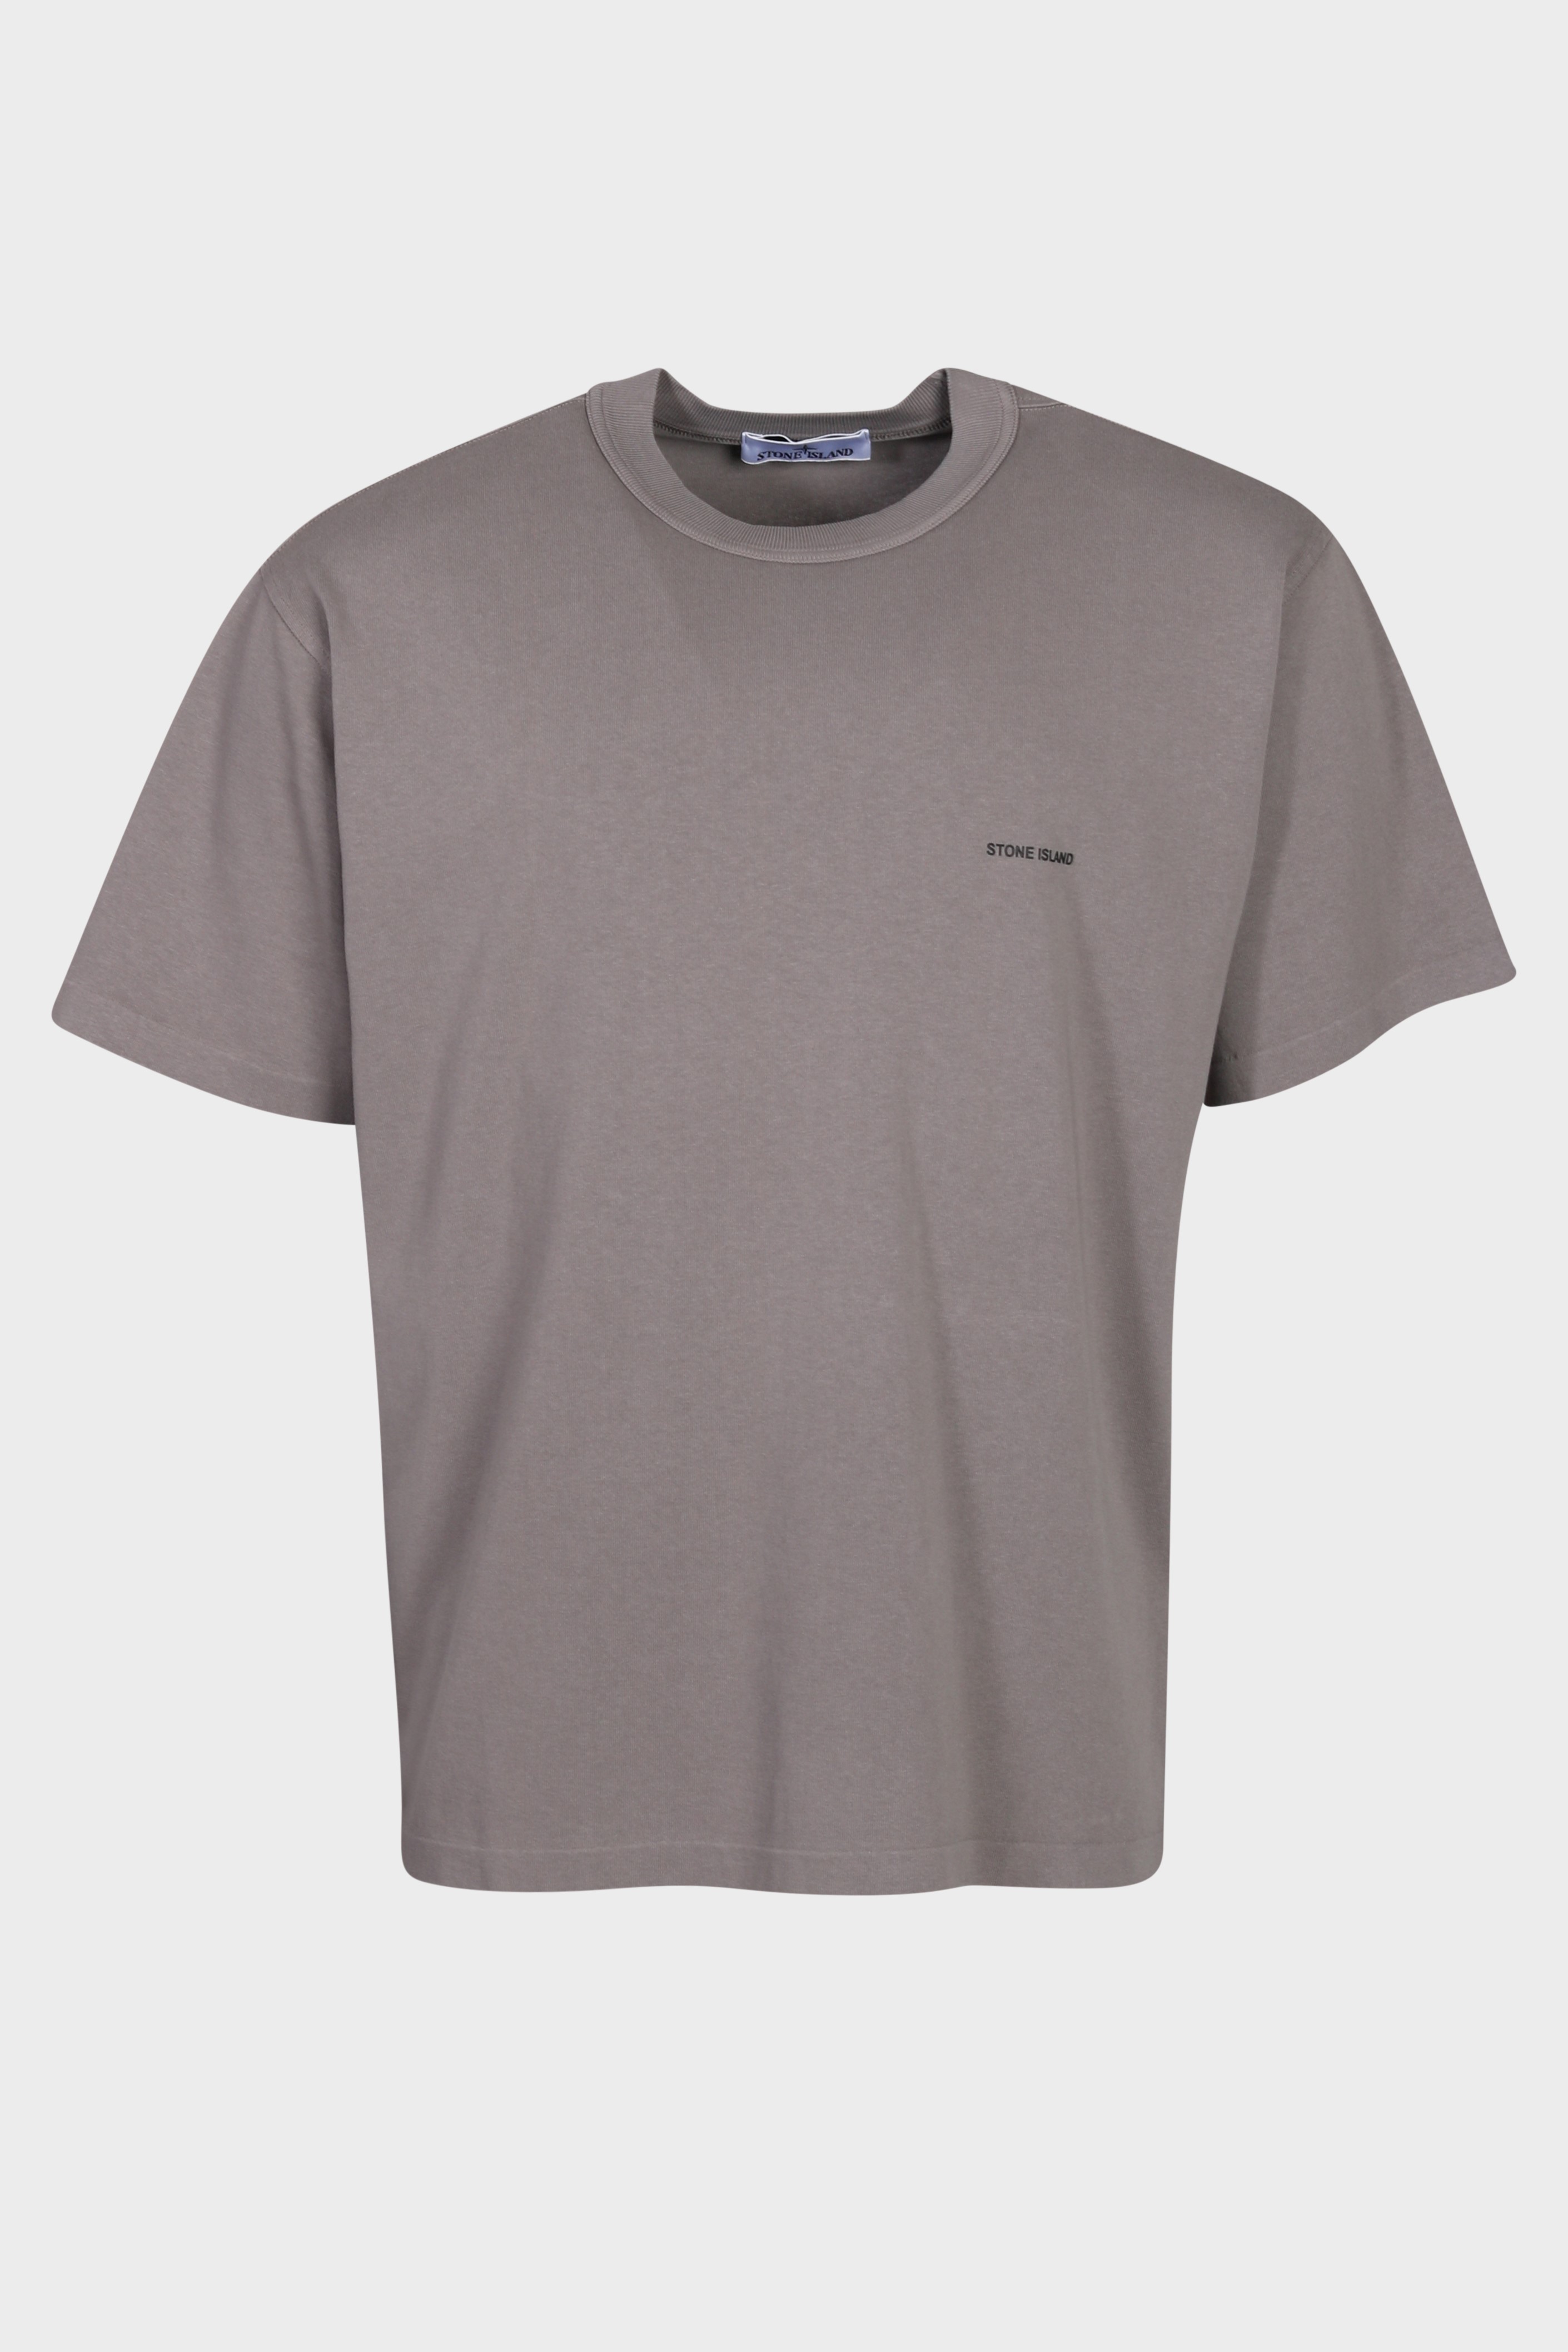 STONE ISLAND Stamp T-Shirt in Brown S